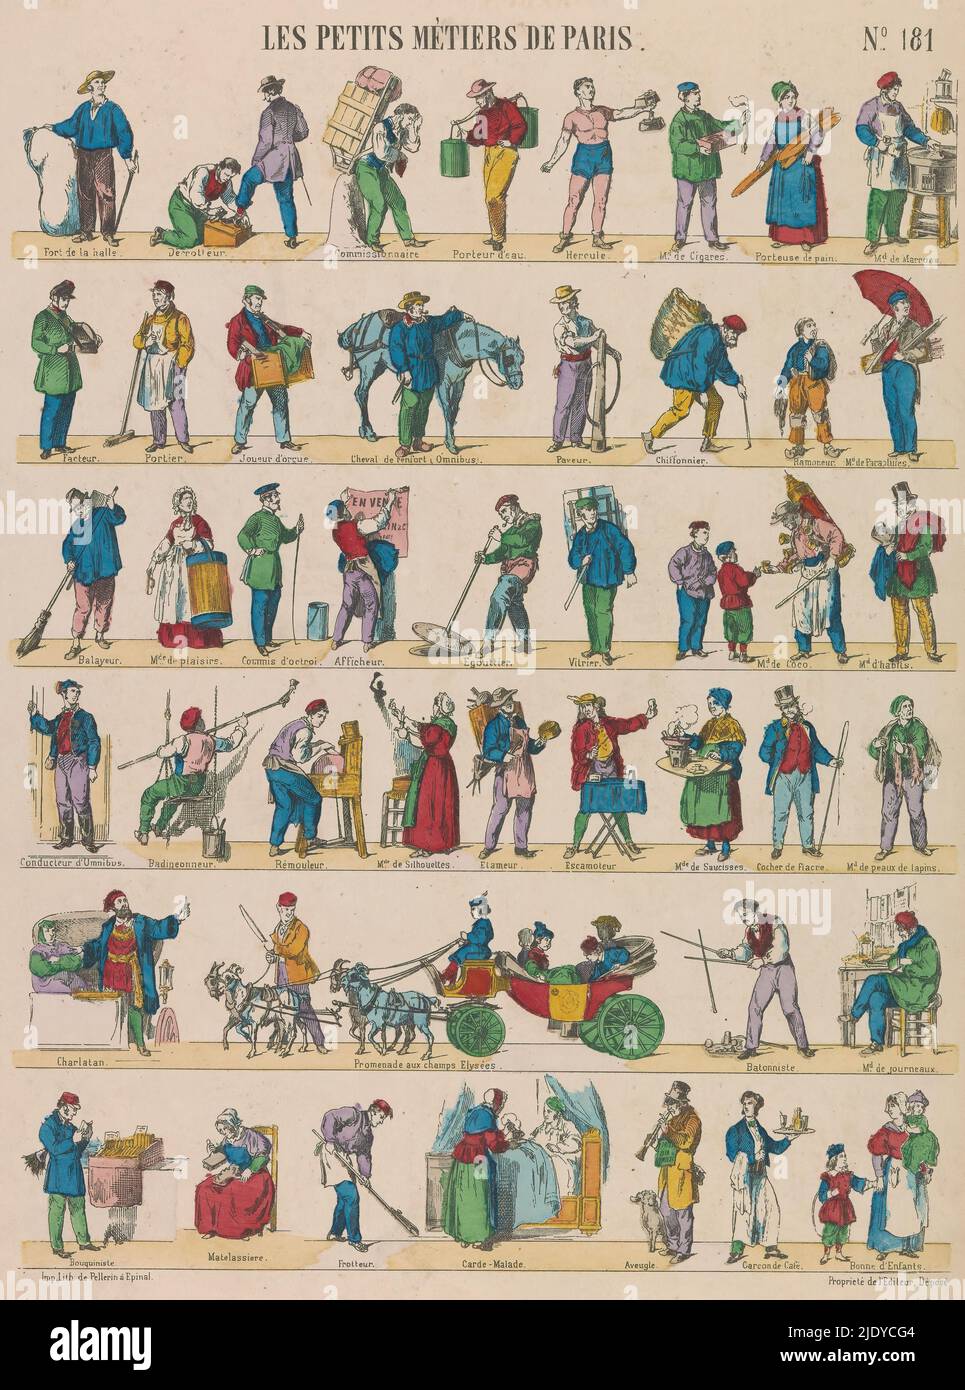 Professions, Les petits métiers de Paris (title on object), Sheet showing 44 different professions, partly street vendors and street performers. Included is a water carrier, an umbrella seller, a chocolate seller, a newspaper seller, and a book seller. Numbered in the upper right: No. 181., publisher: Pellerin & Cie., (mentioned on object), printer: Pellerin & Cie., (mentioned on object), print maker: anonymous, Épinal, c. 1850 - c. 1900, paper, height 401 mm × width 299 mm Stock Photo